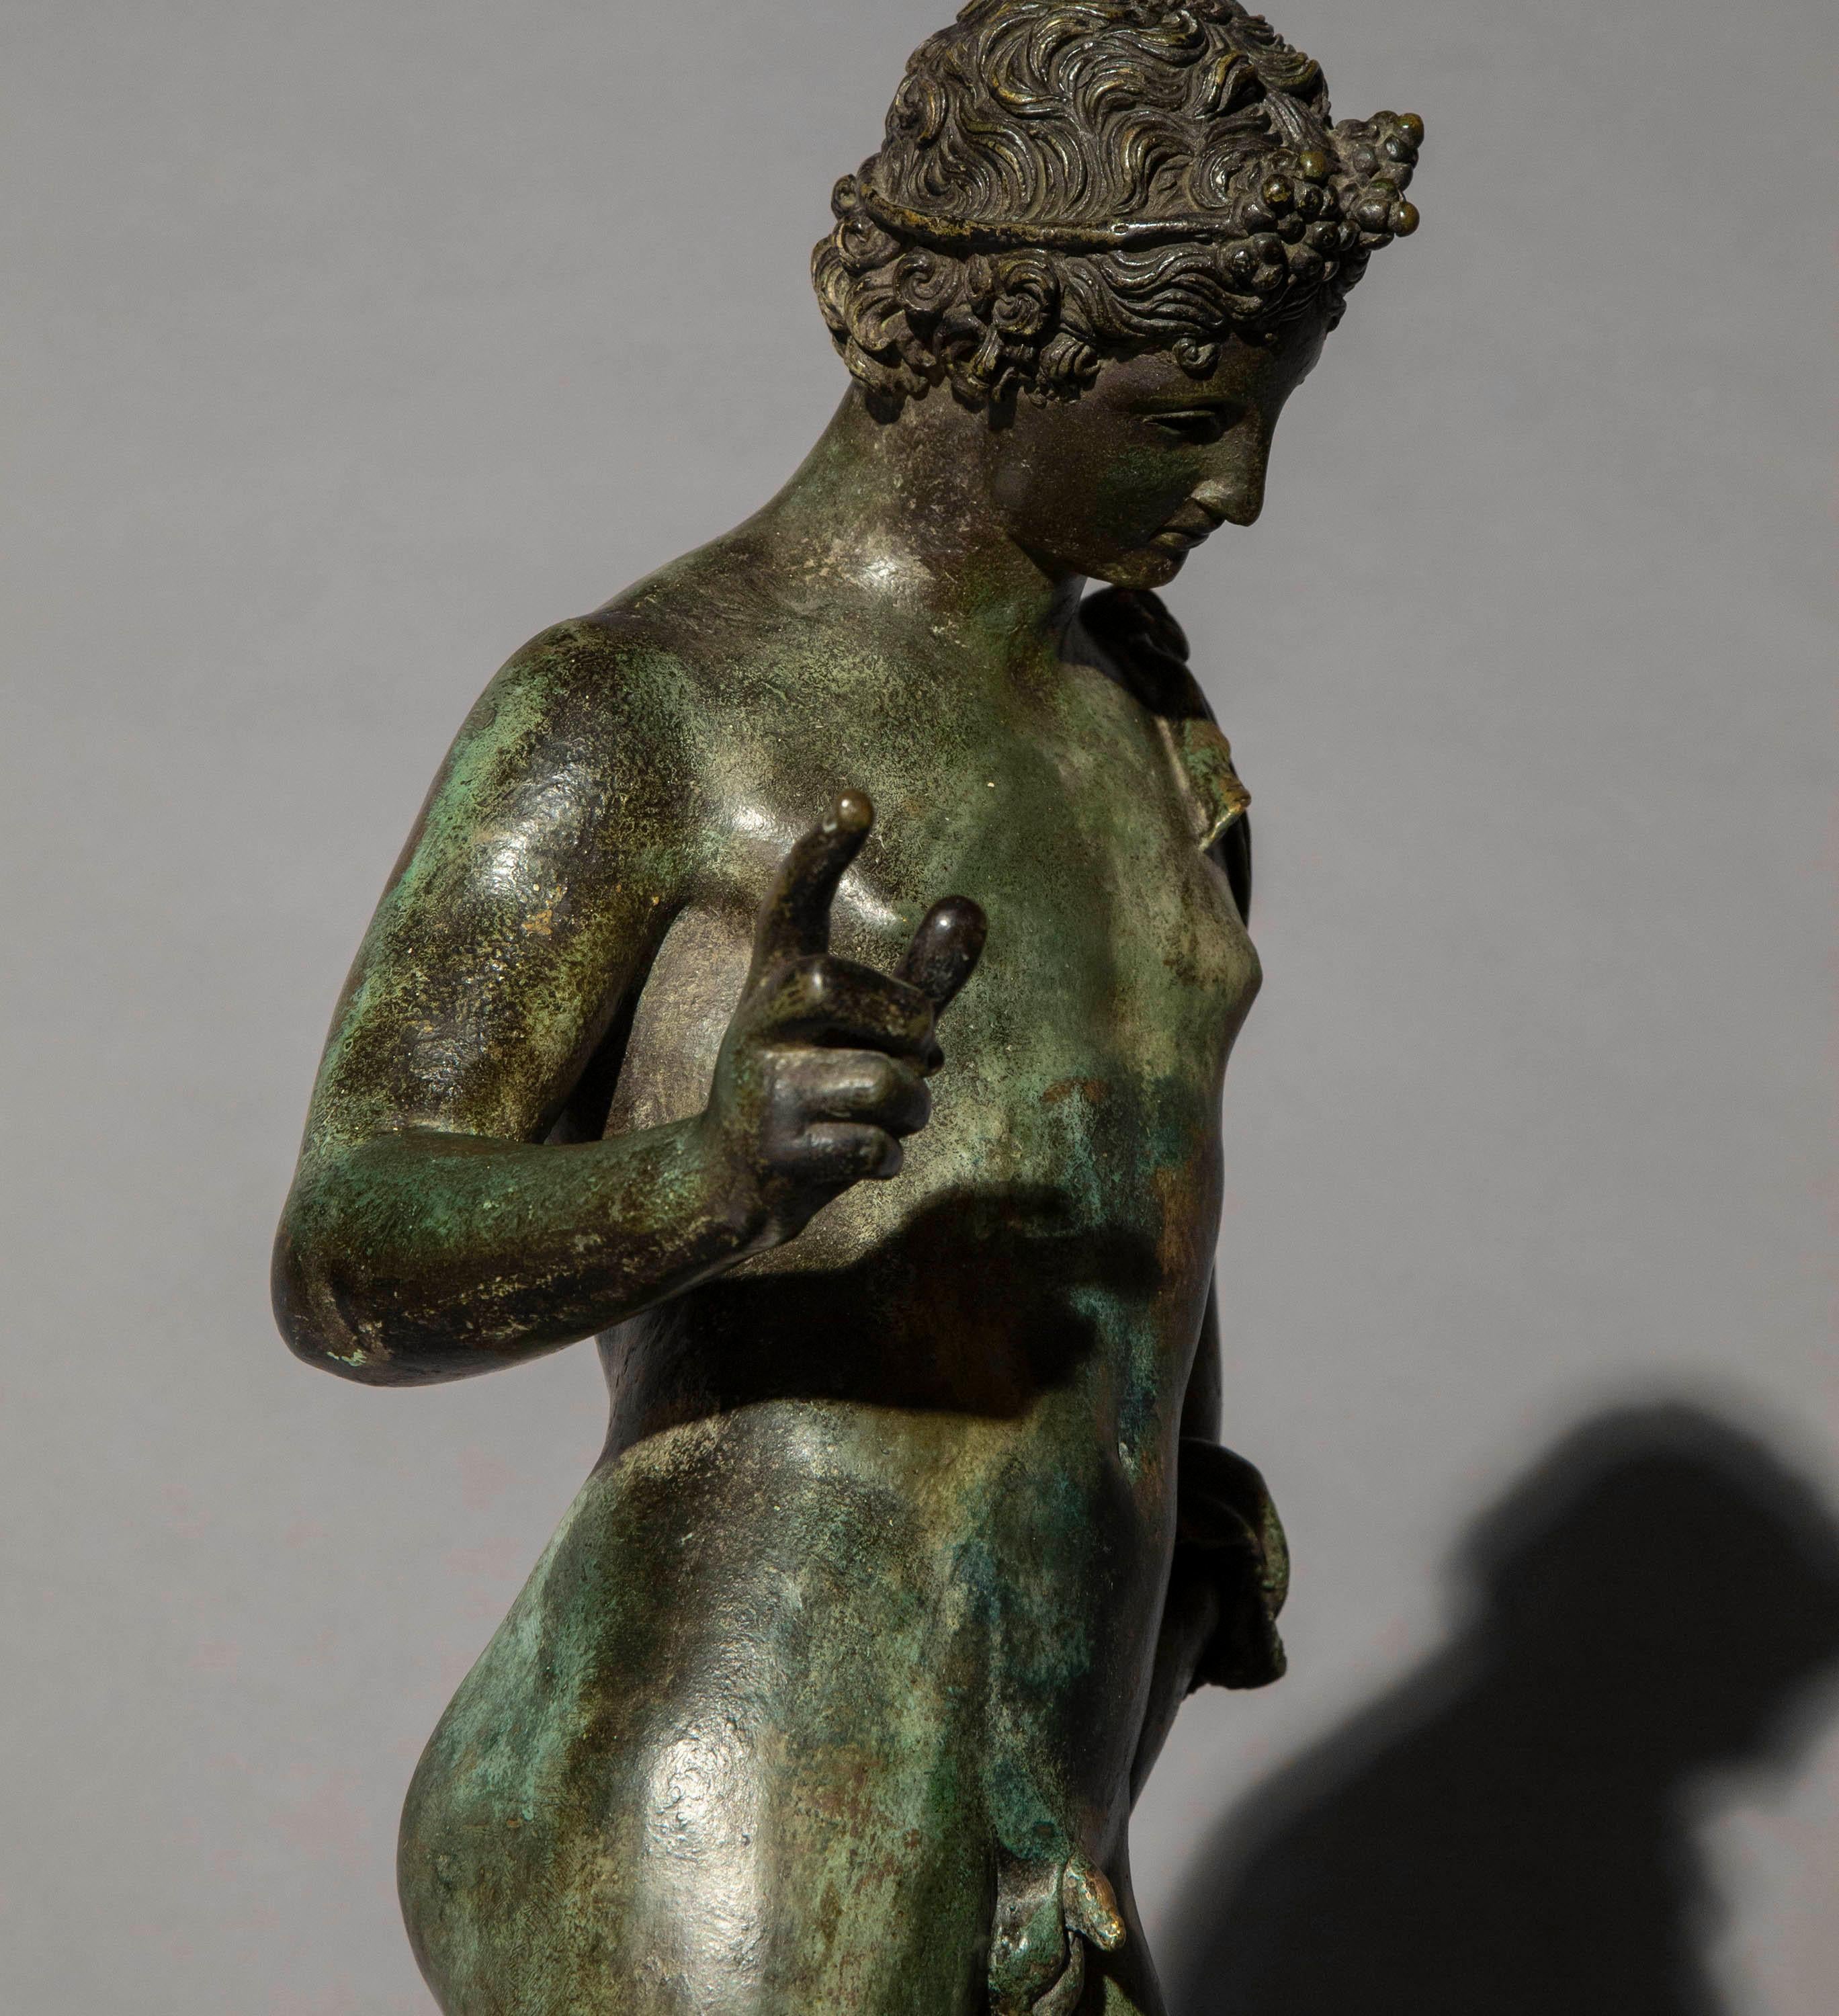 Italian 19th Century Grand Tour Bronze Figure of a Young Man as Dionysos or Narcissus